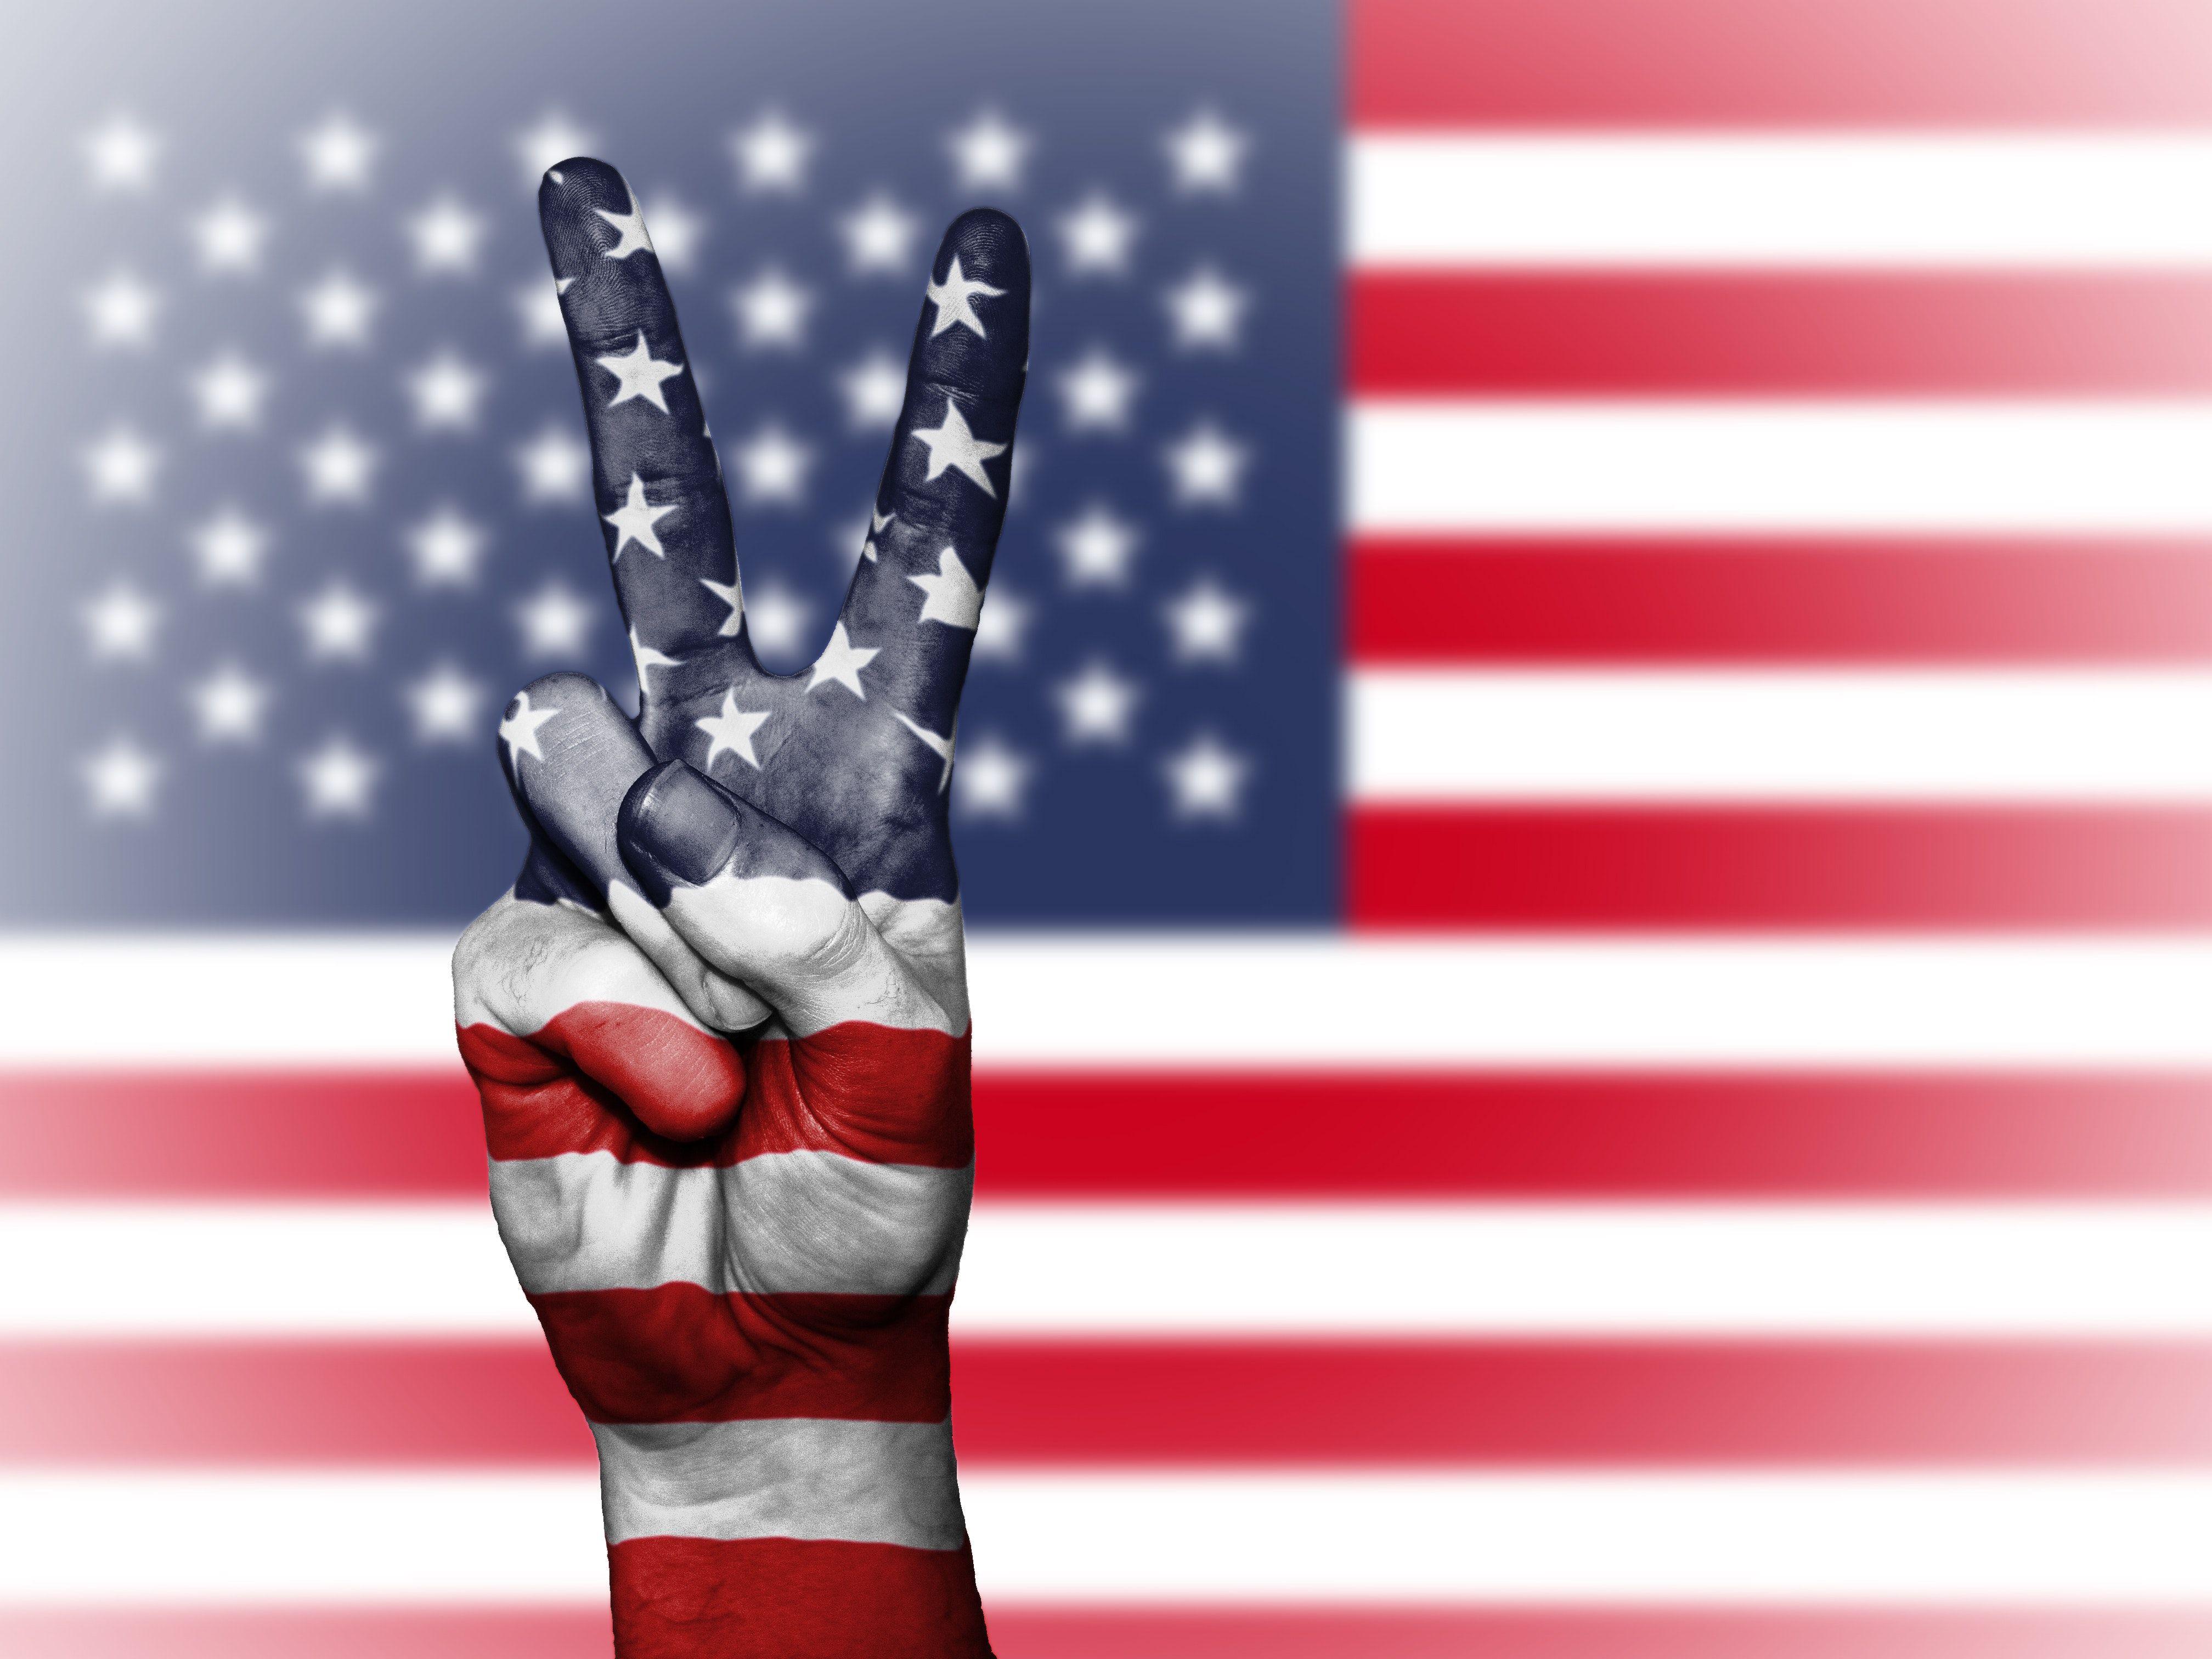 Peace Hand Sign With Usa Flag Graphic · Free